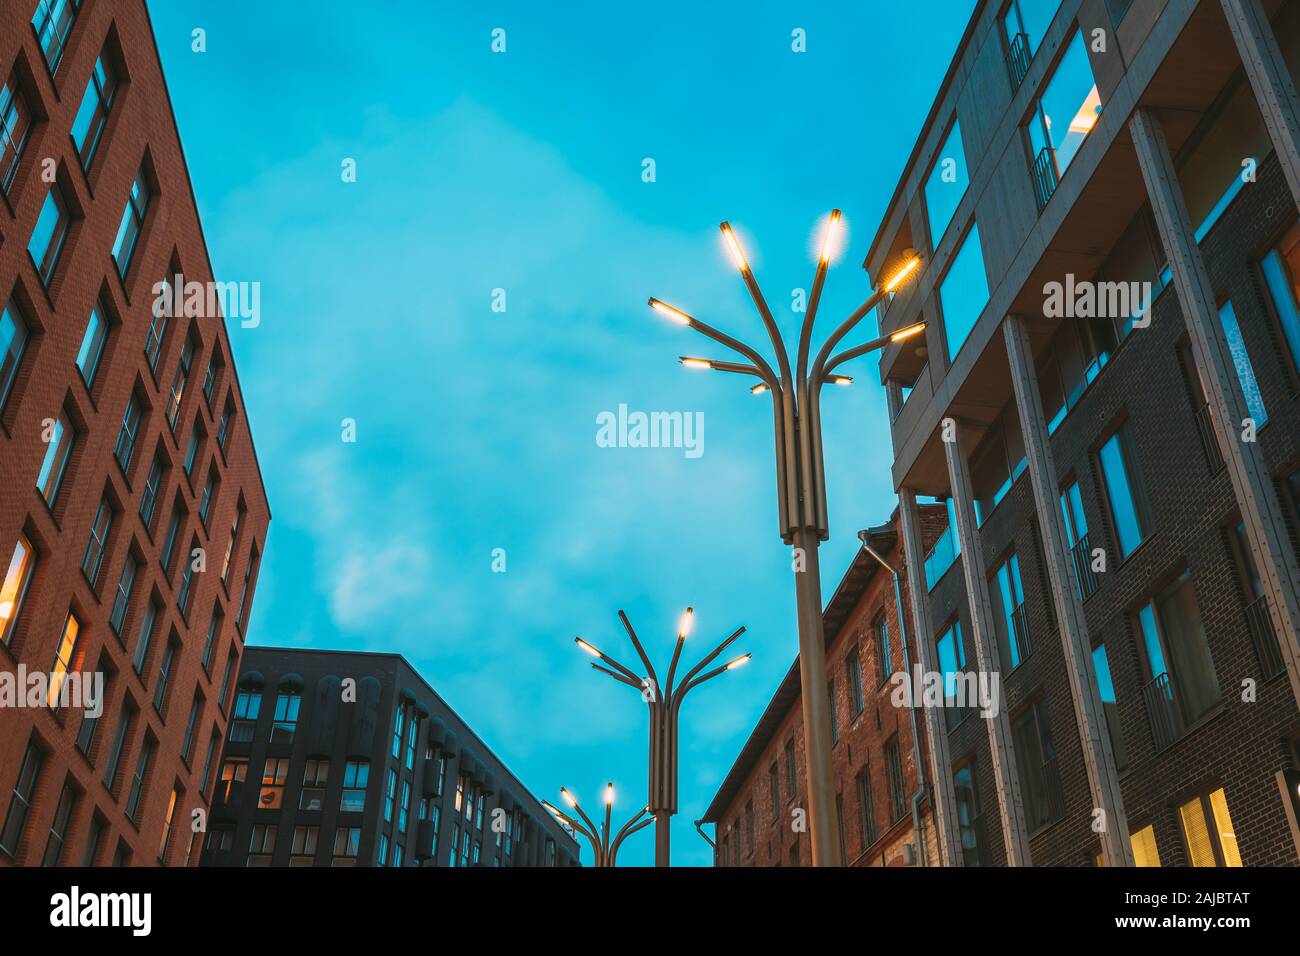 Tallinn, Estonia. Historical Rotermann City Quarter In Evening Illuminations. Rotermann Quarter Includes Old Industrial Buildings With New Function An Stock Photo